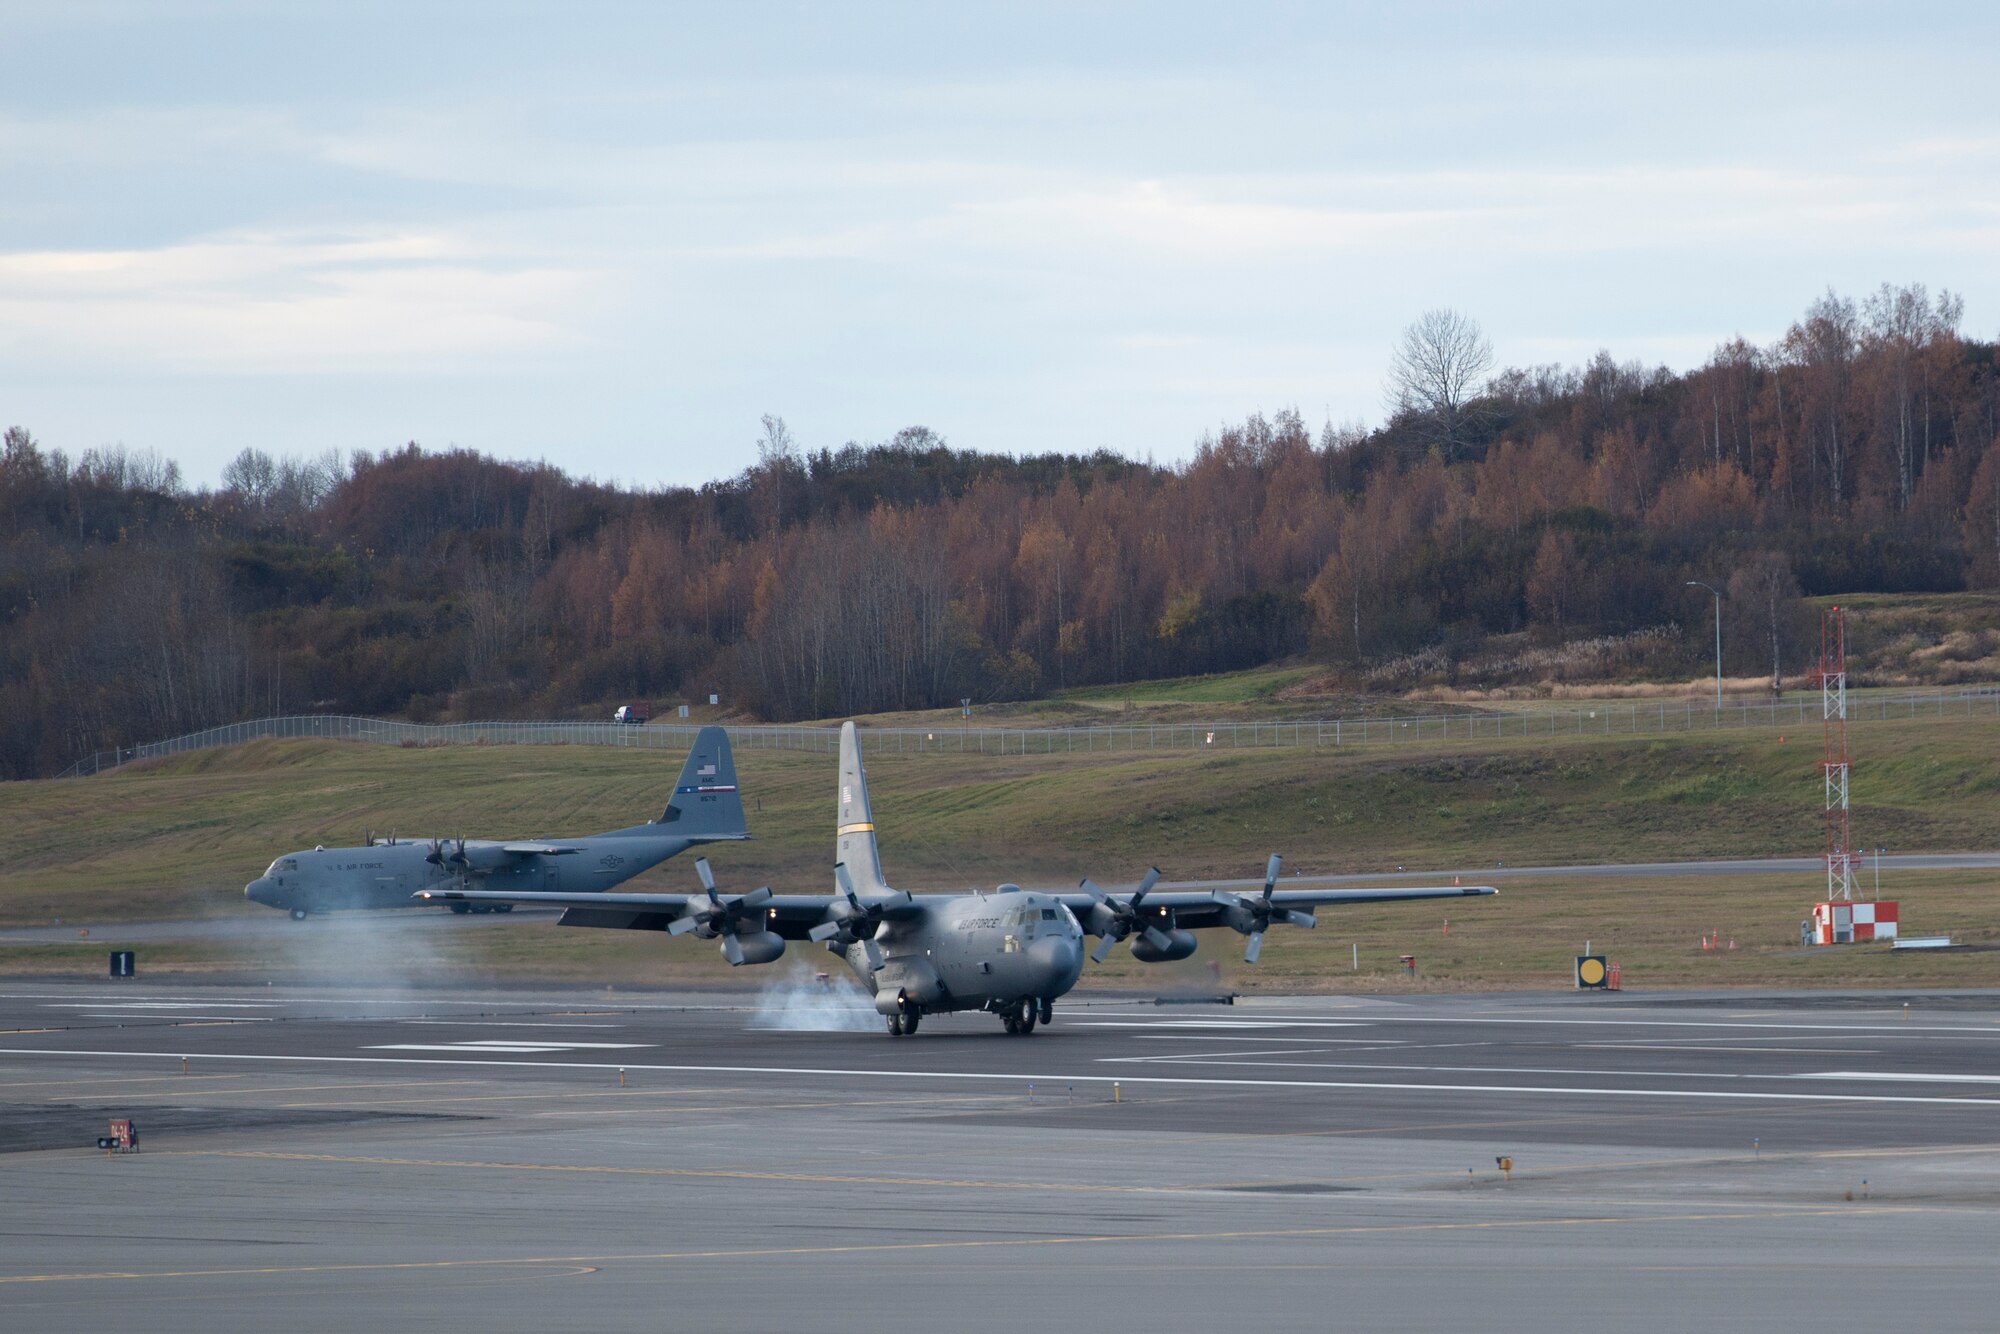 A C-130 Hercules from Joint Base Elmendorf-Richardson performs a touch-and-go landing during Red Flag - Alaska 17-1 Oct. 12, 2016. RF-A is a joint exercise focused on improving combat readiness of the U.S. military and international forces, which included the Republic of Korea Air Force and Royal New Zealand Air Force this iteration.